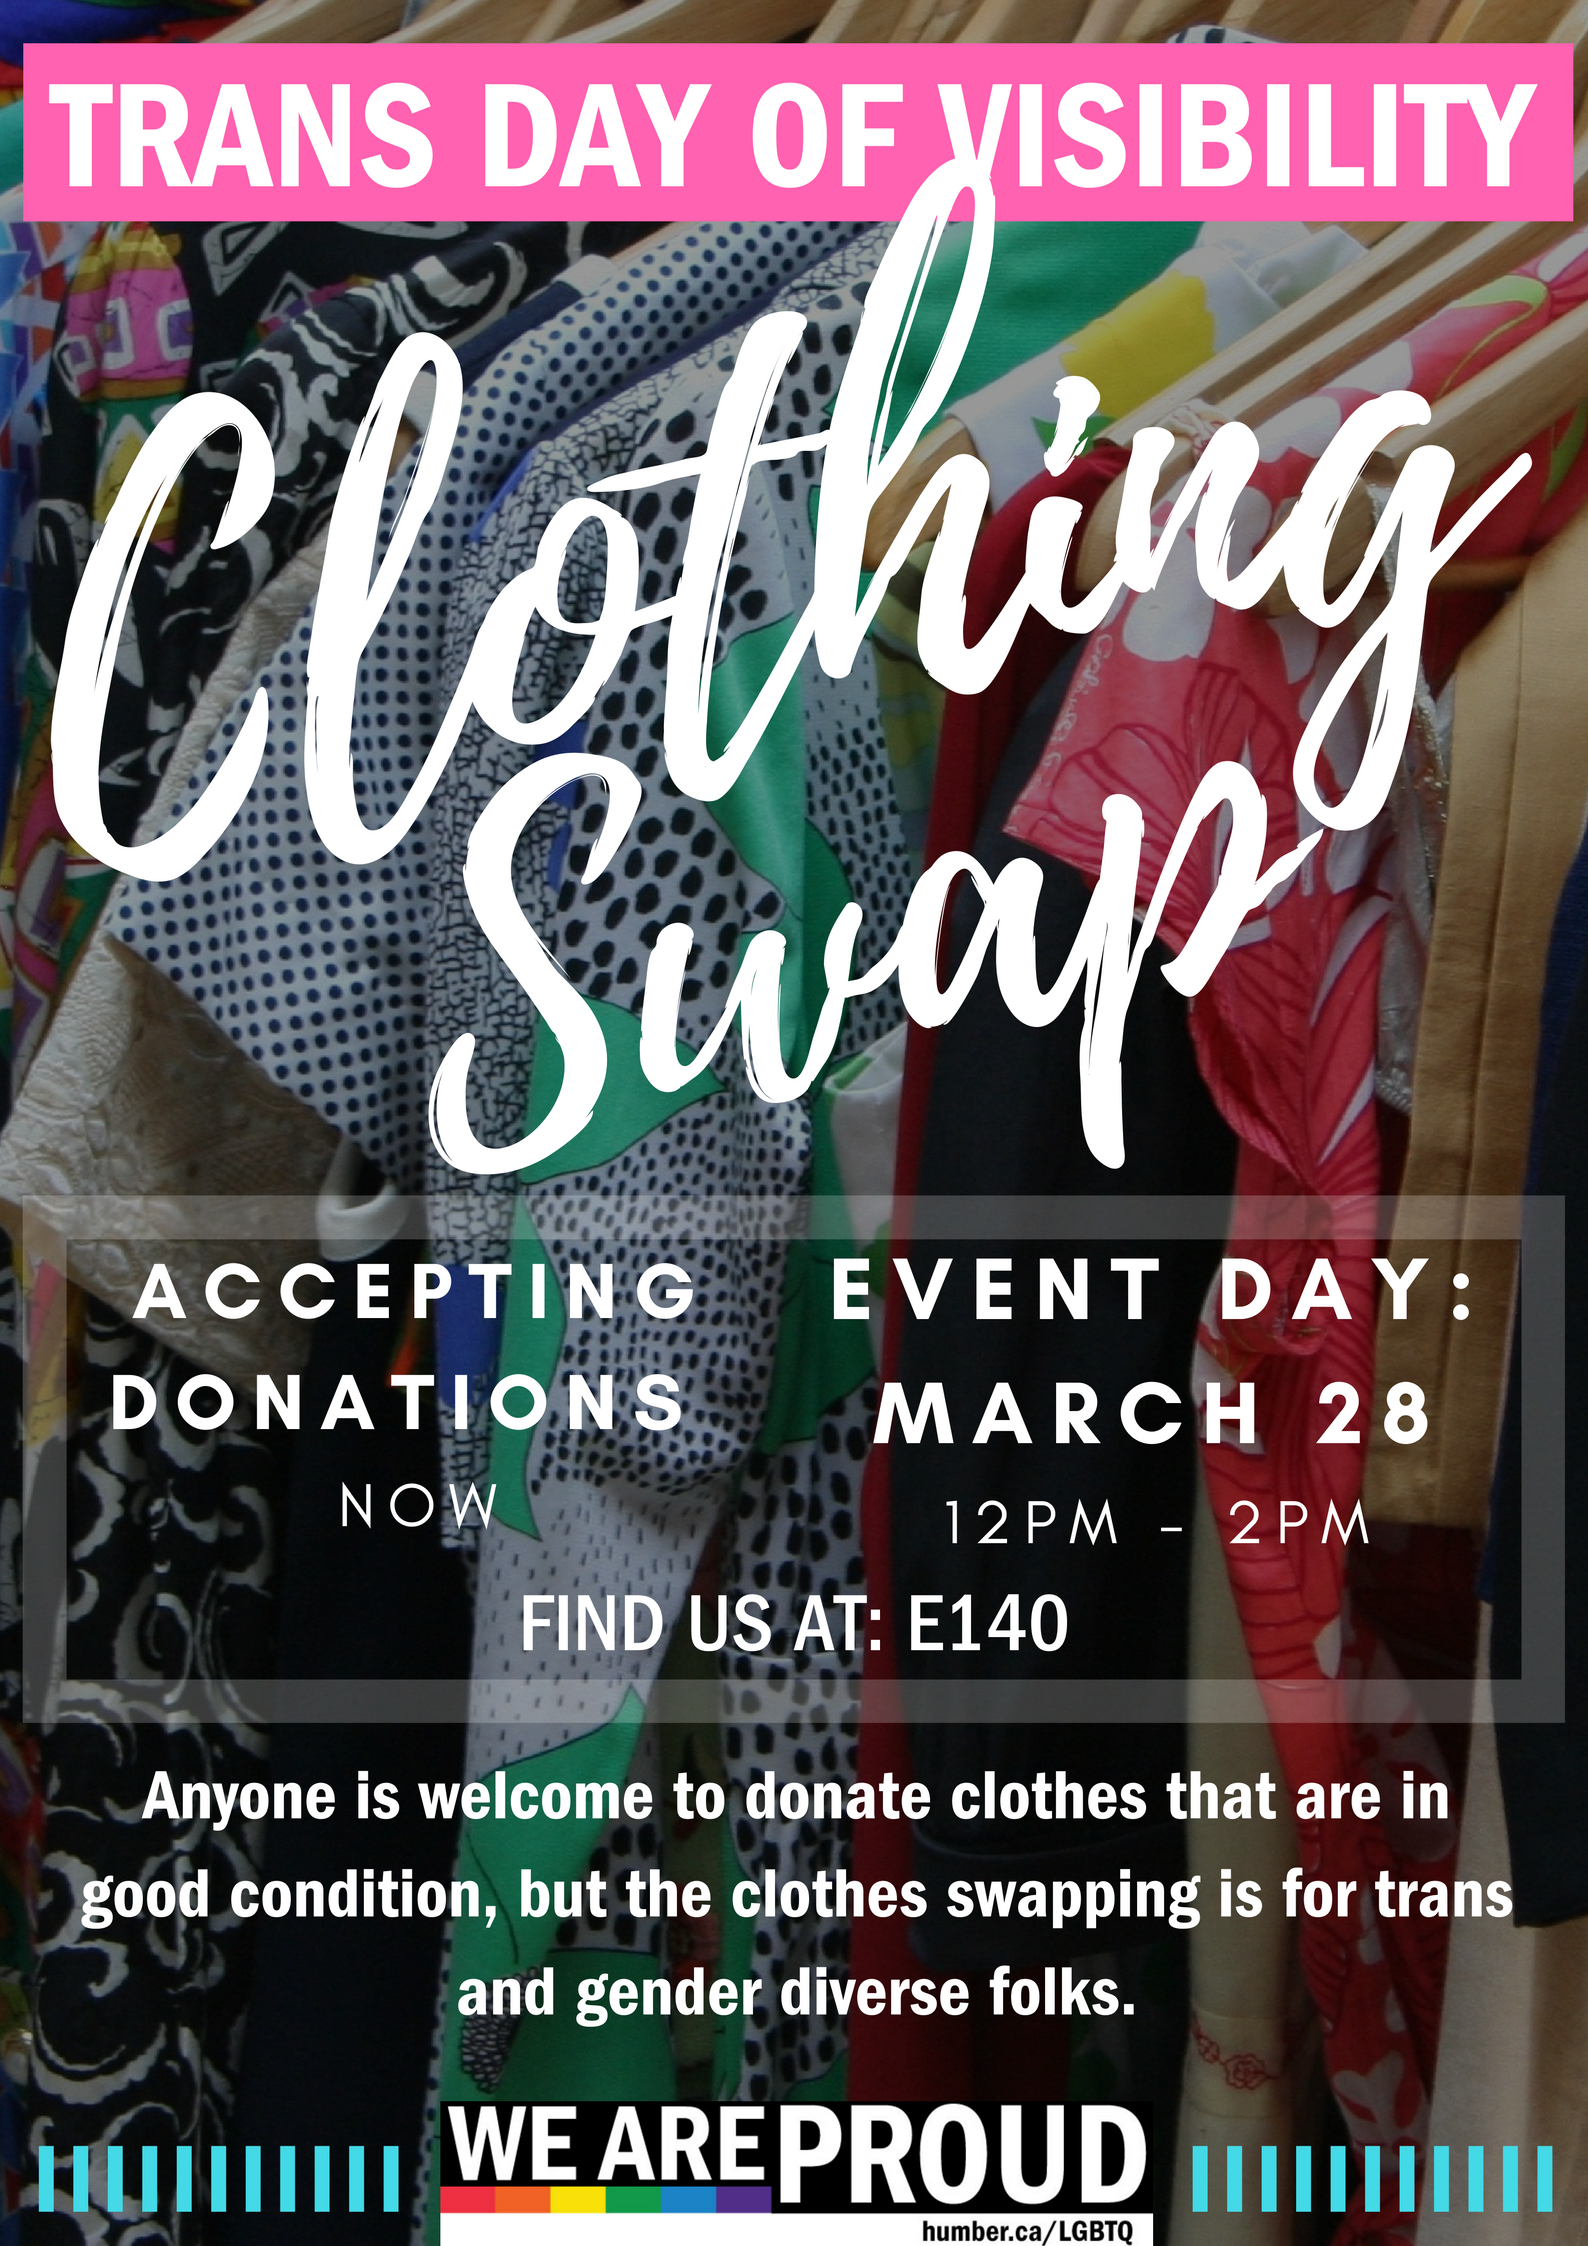 Trans Day of Visibility Clothing Swap. Accepting donations now. Event day: March 28 12-2PM. Find us at E140. Anyone is welcome to donate clothes that are in good condition, but the clothes swapping is for trans and gender diverse folks. 